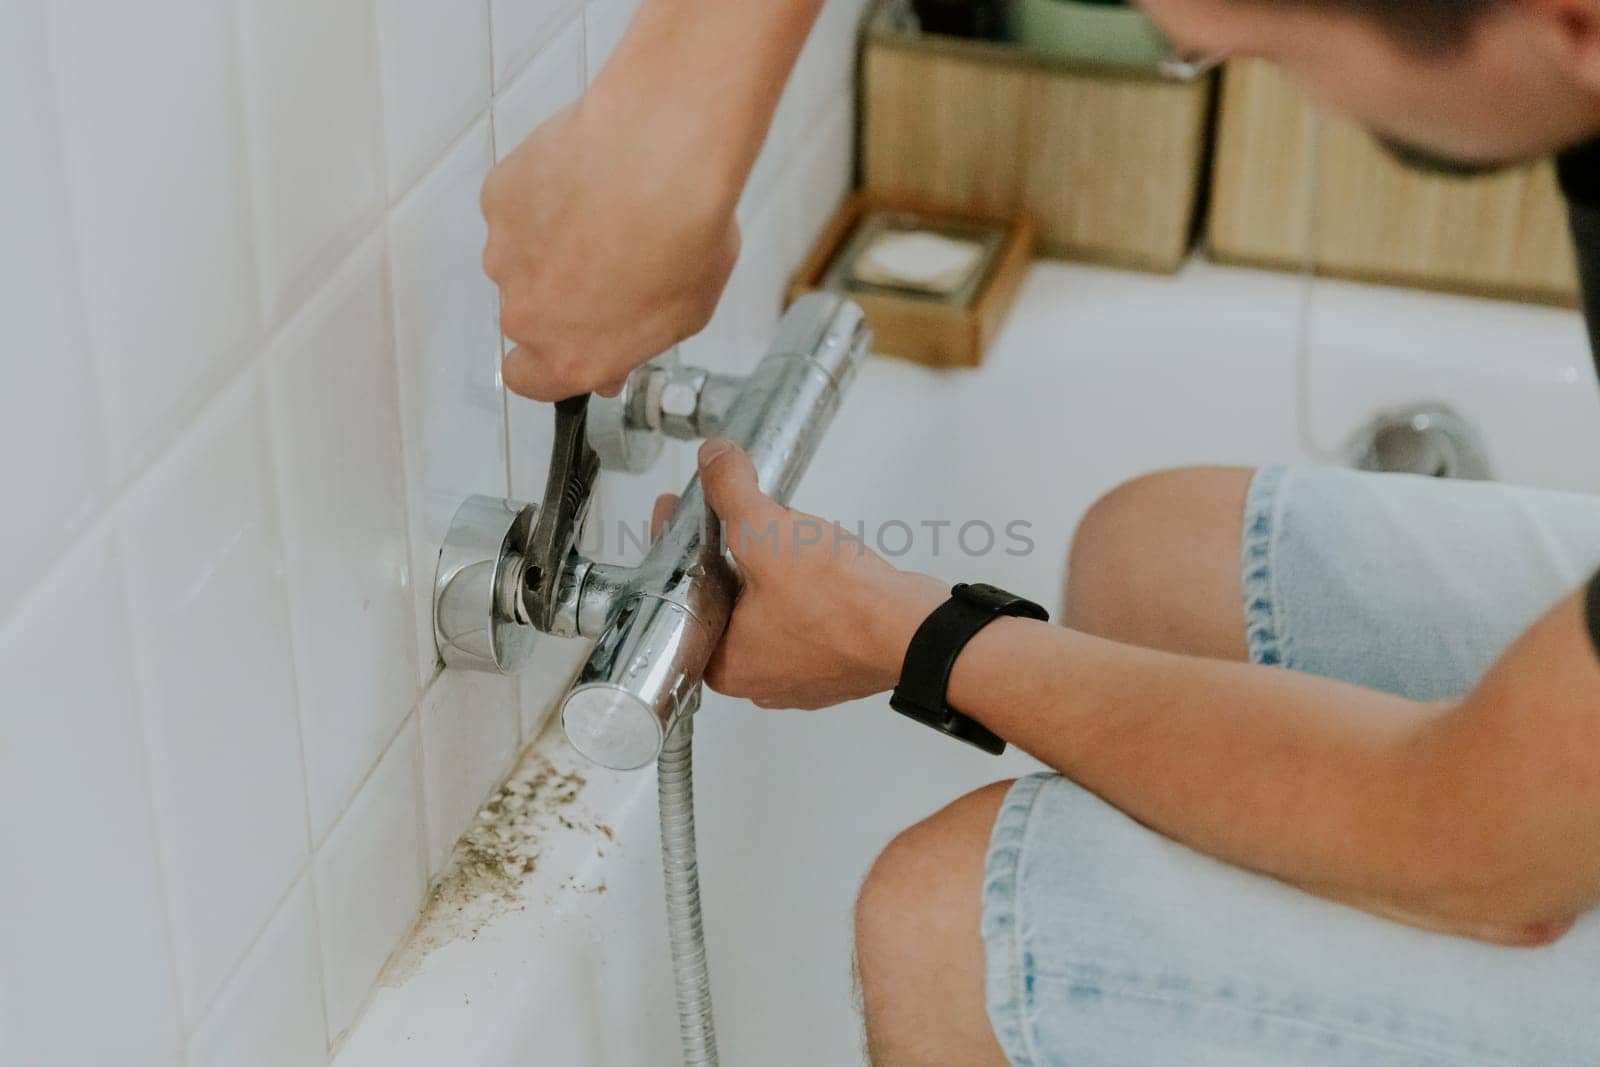 One young brunette Caucasian guy manually installs a faucet into the walls using an adjustable wrench while sitting on the edge of the bathtub, close-up side view. Step by step.